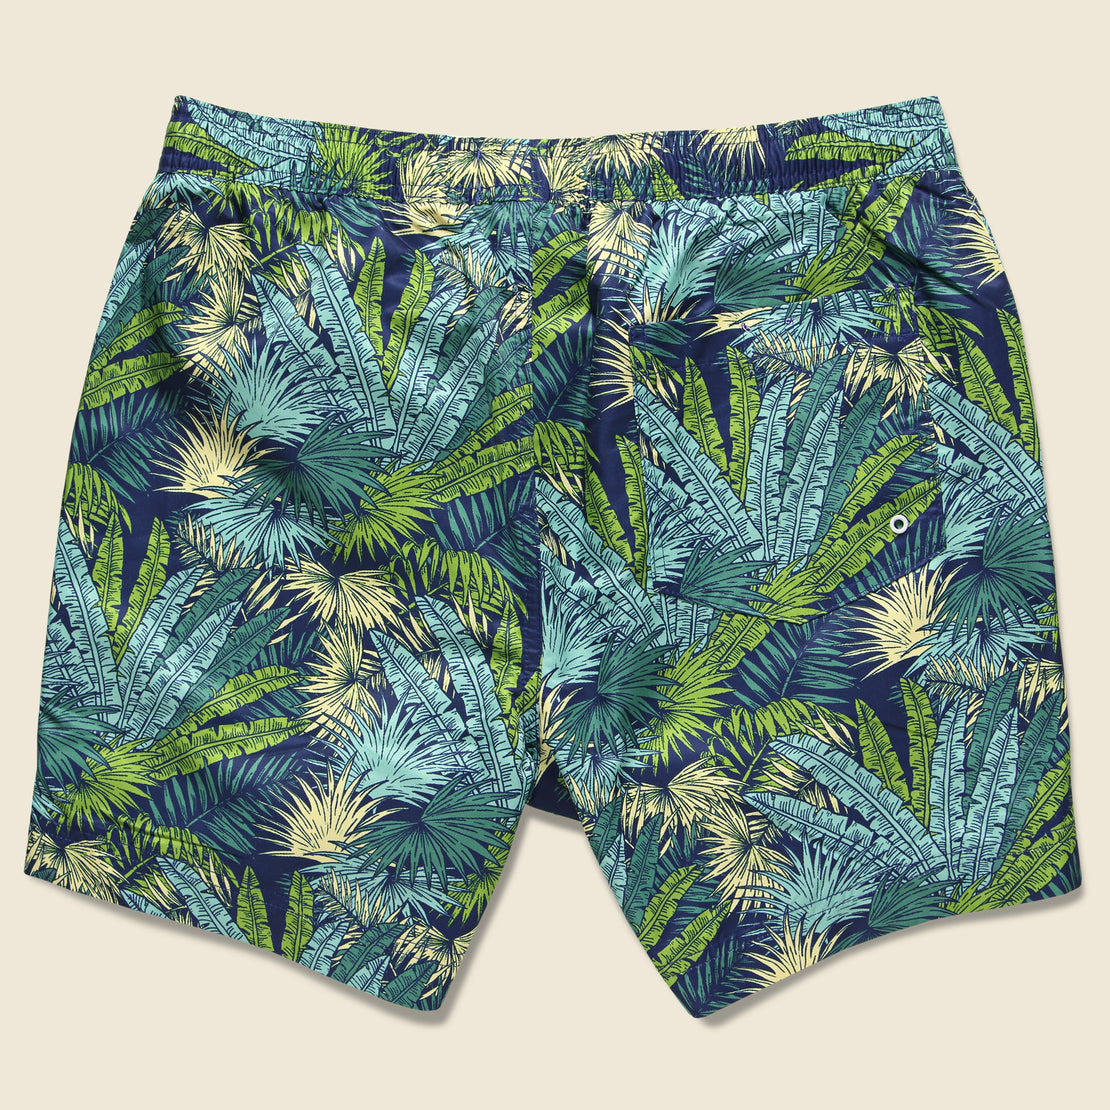 Printed Swimshorts - Palms - Afield - STAG Provisions - Shorts - Swim